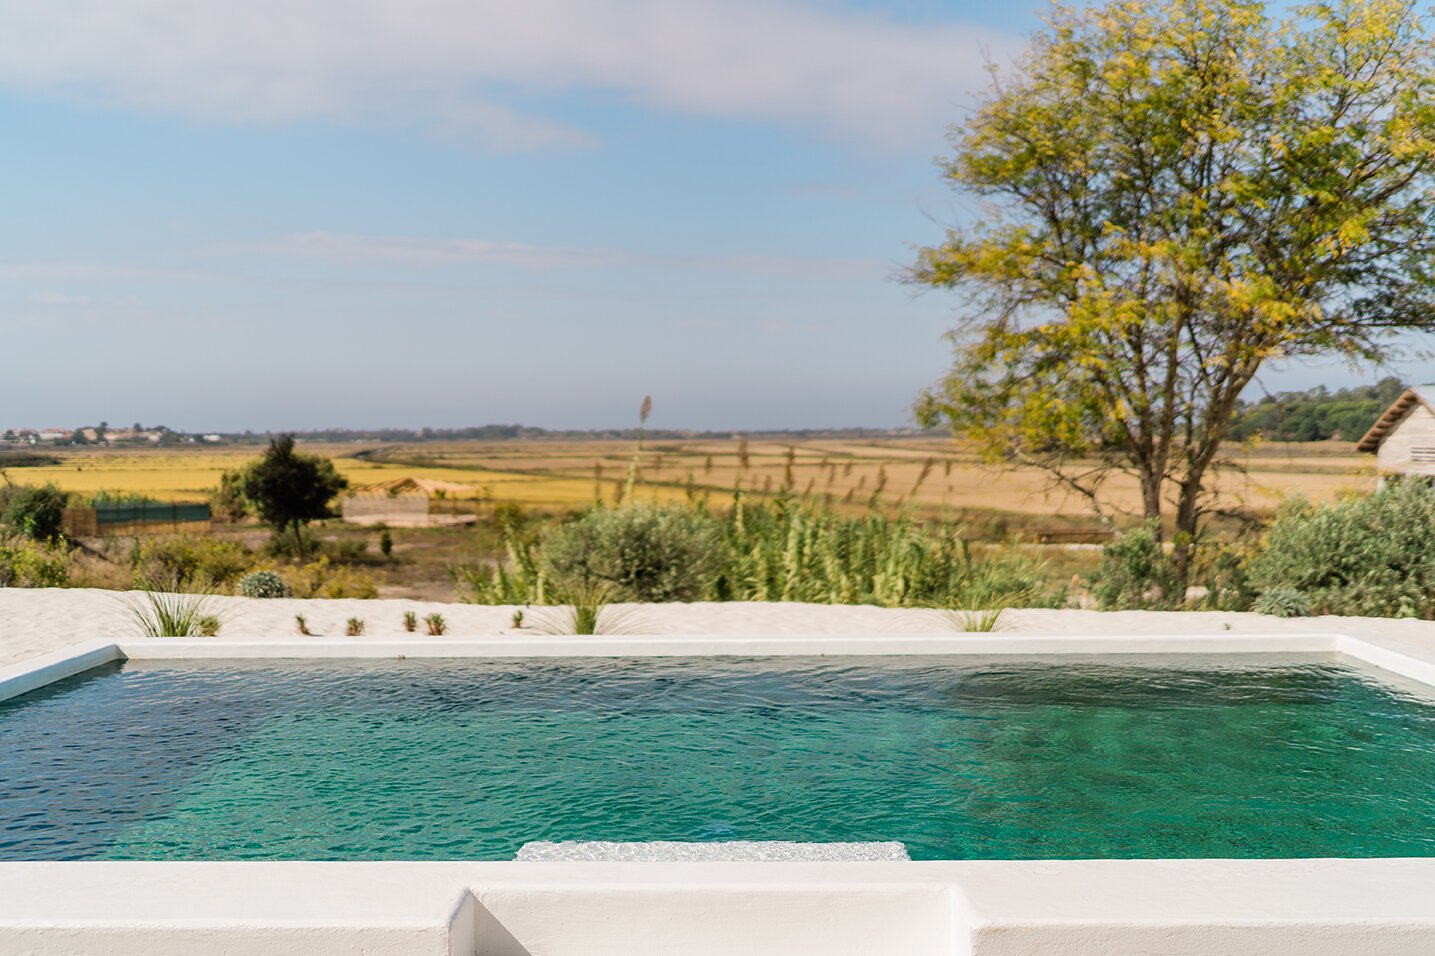 The Best Hotels in Comporta Portugal